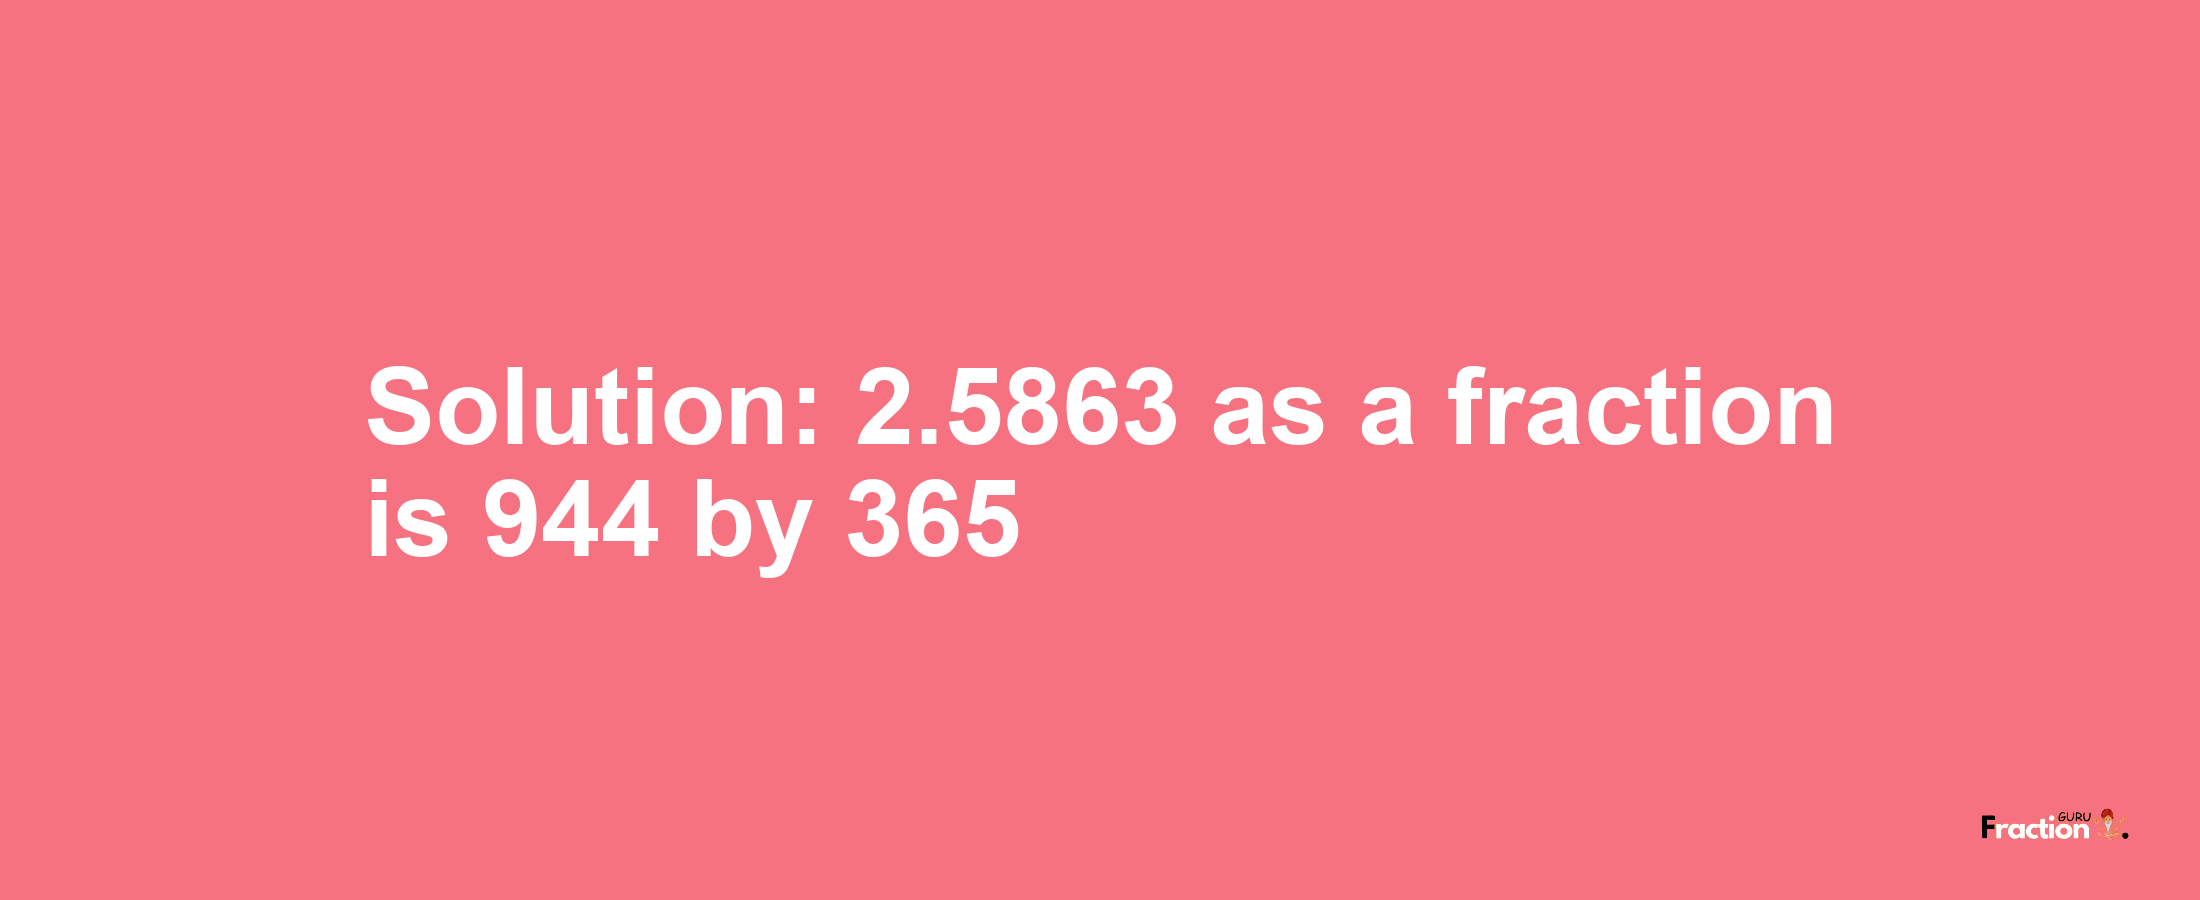 Solution:2.5863 as a fraction is 944/365